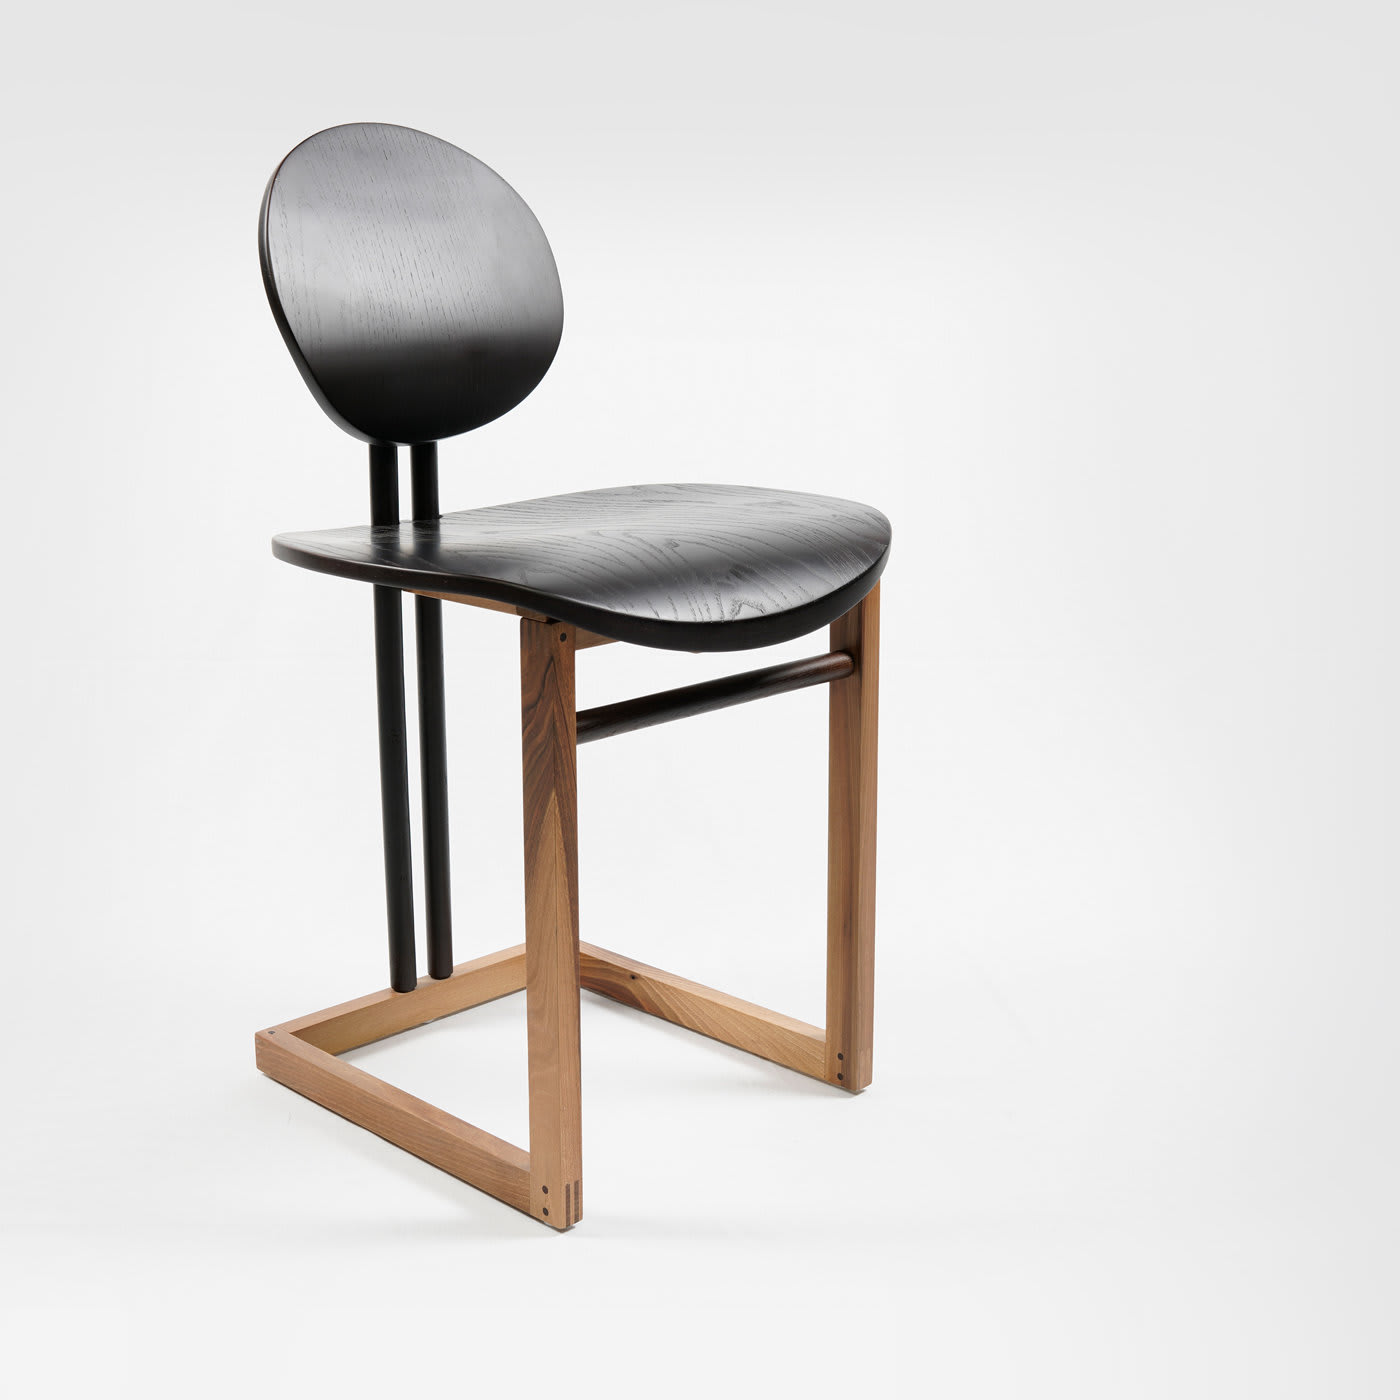 Luna dining chair - Secolo